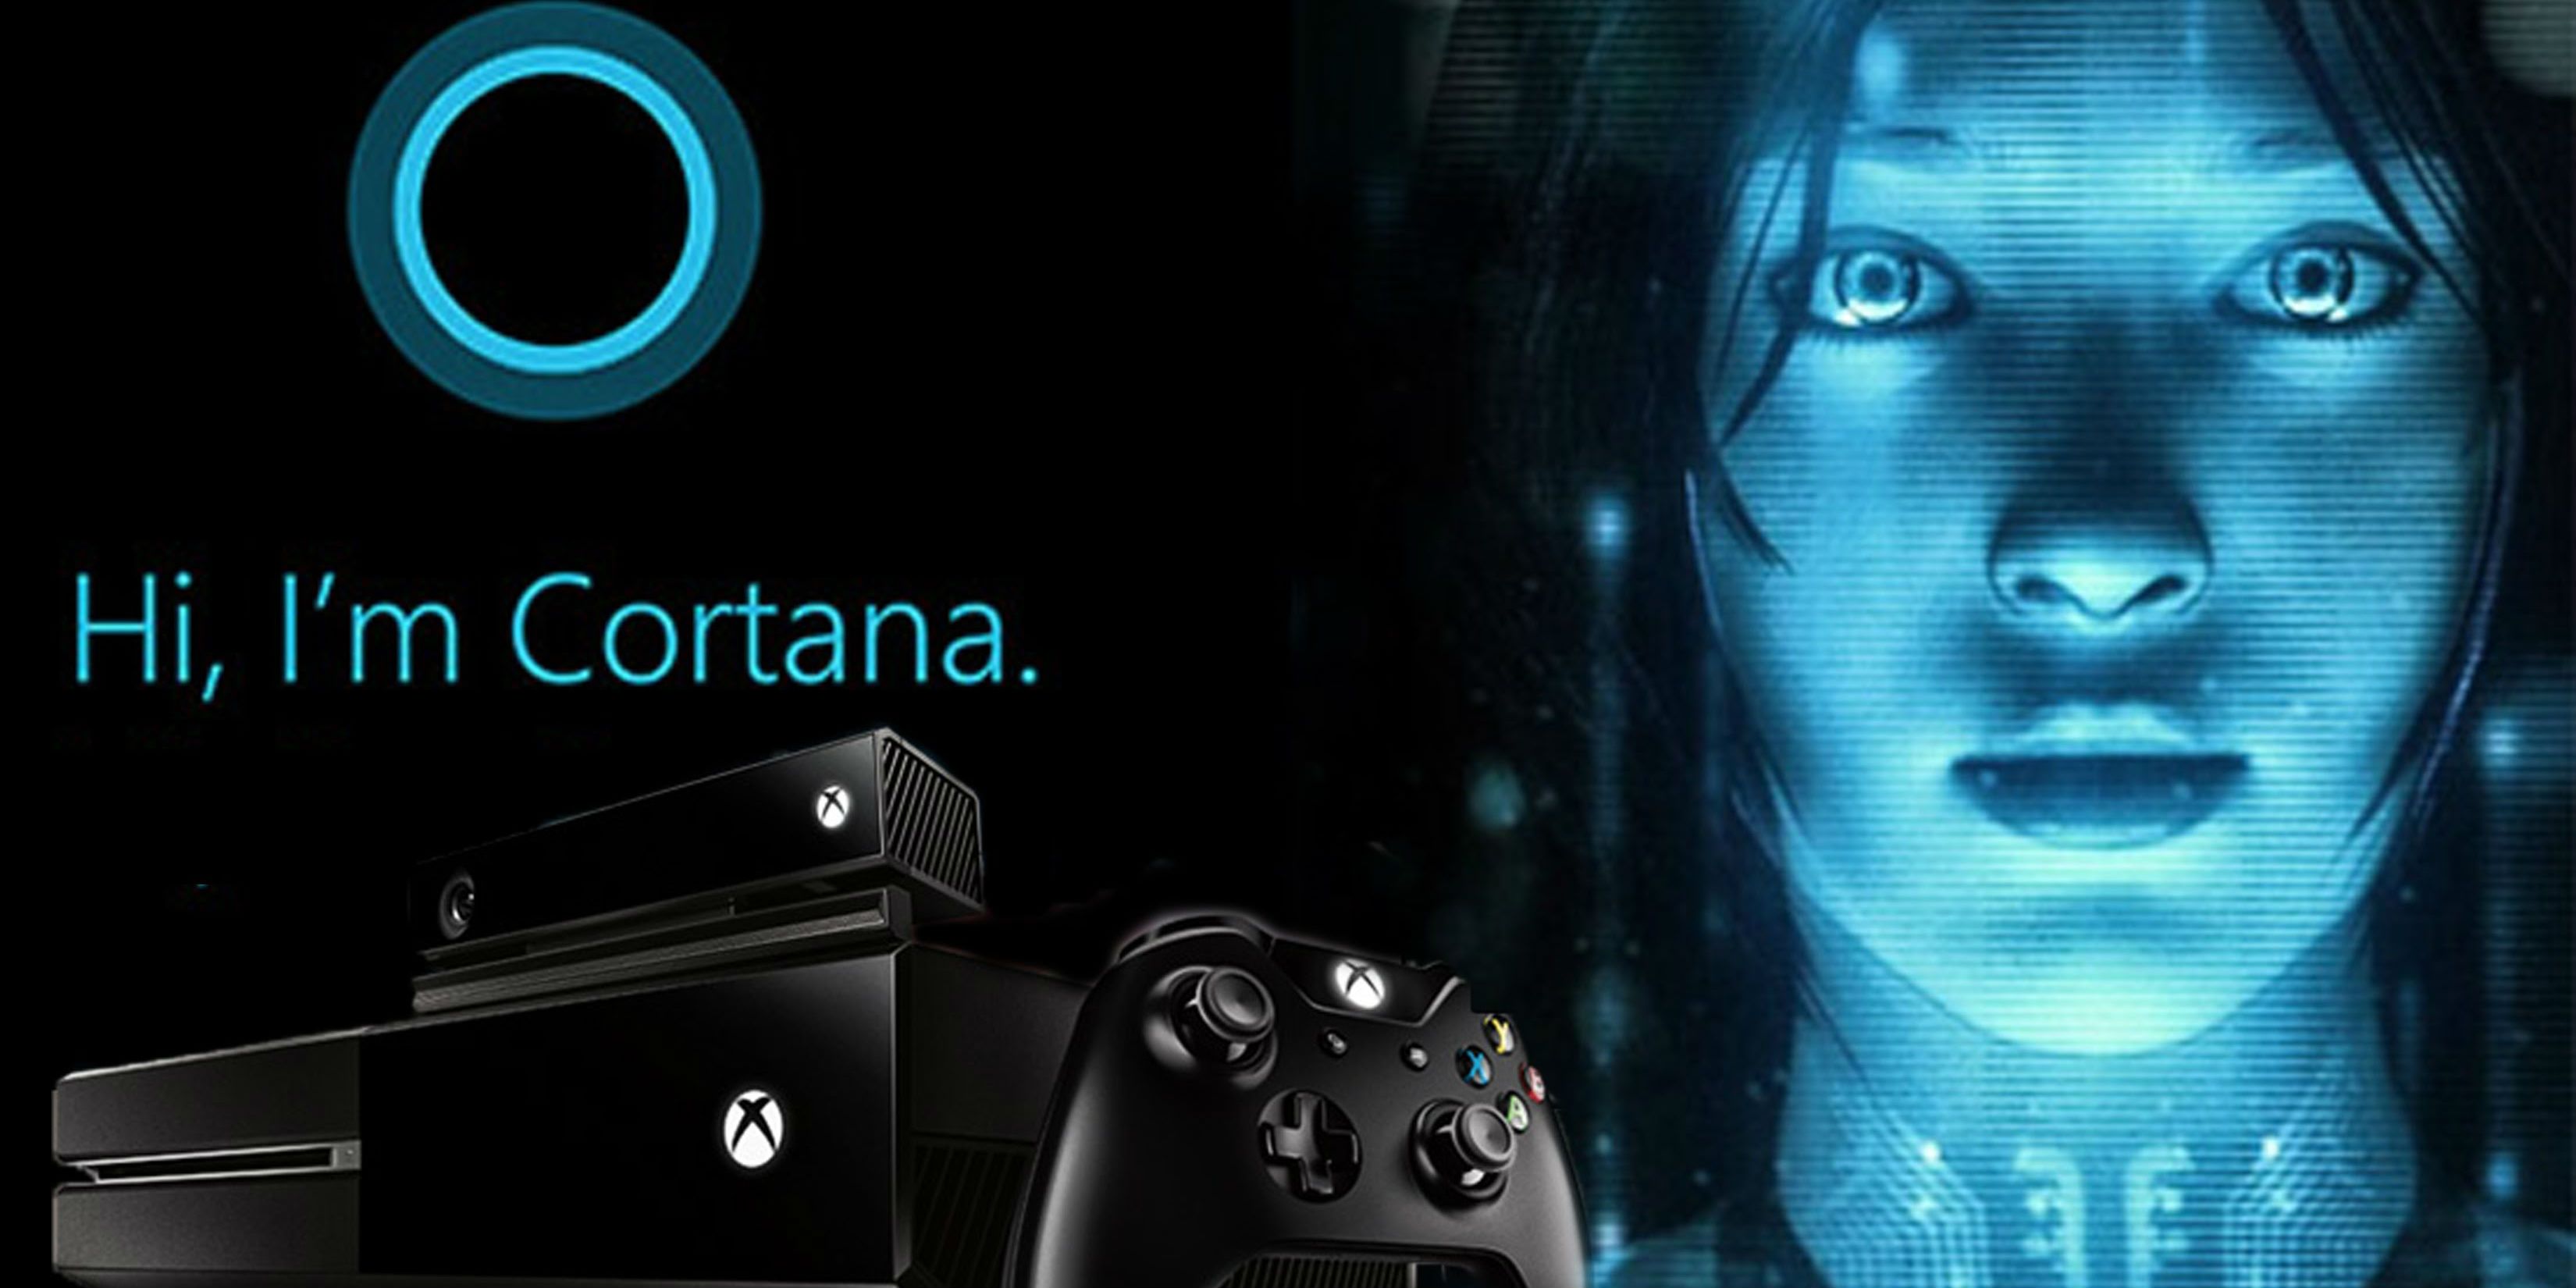 Cortana assistant removed from Xbox One